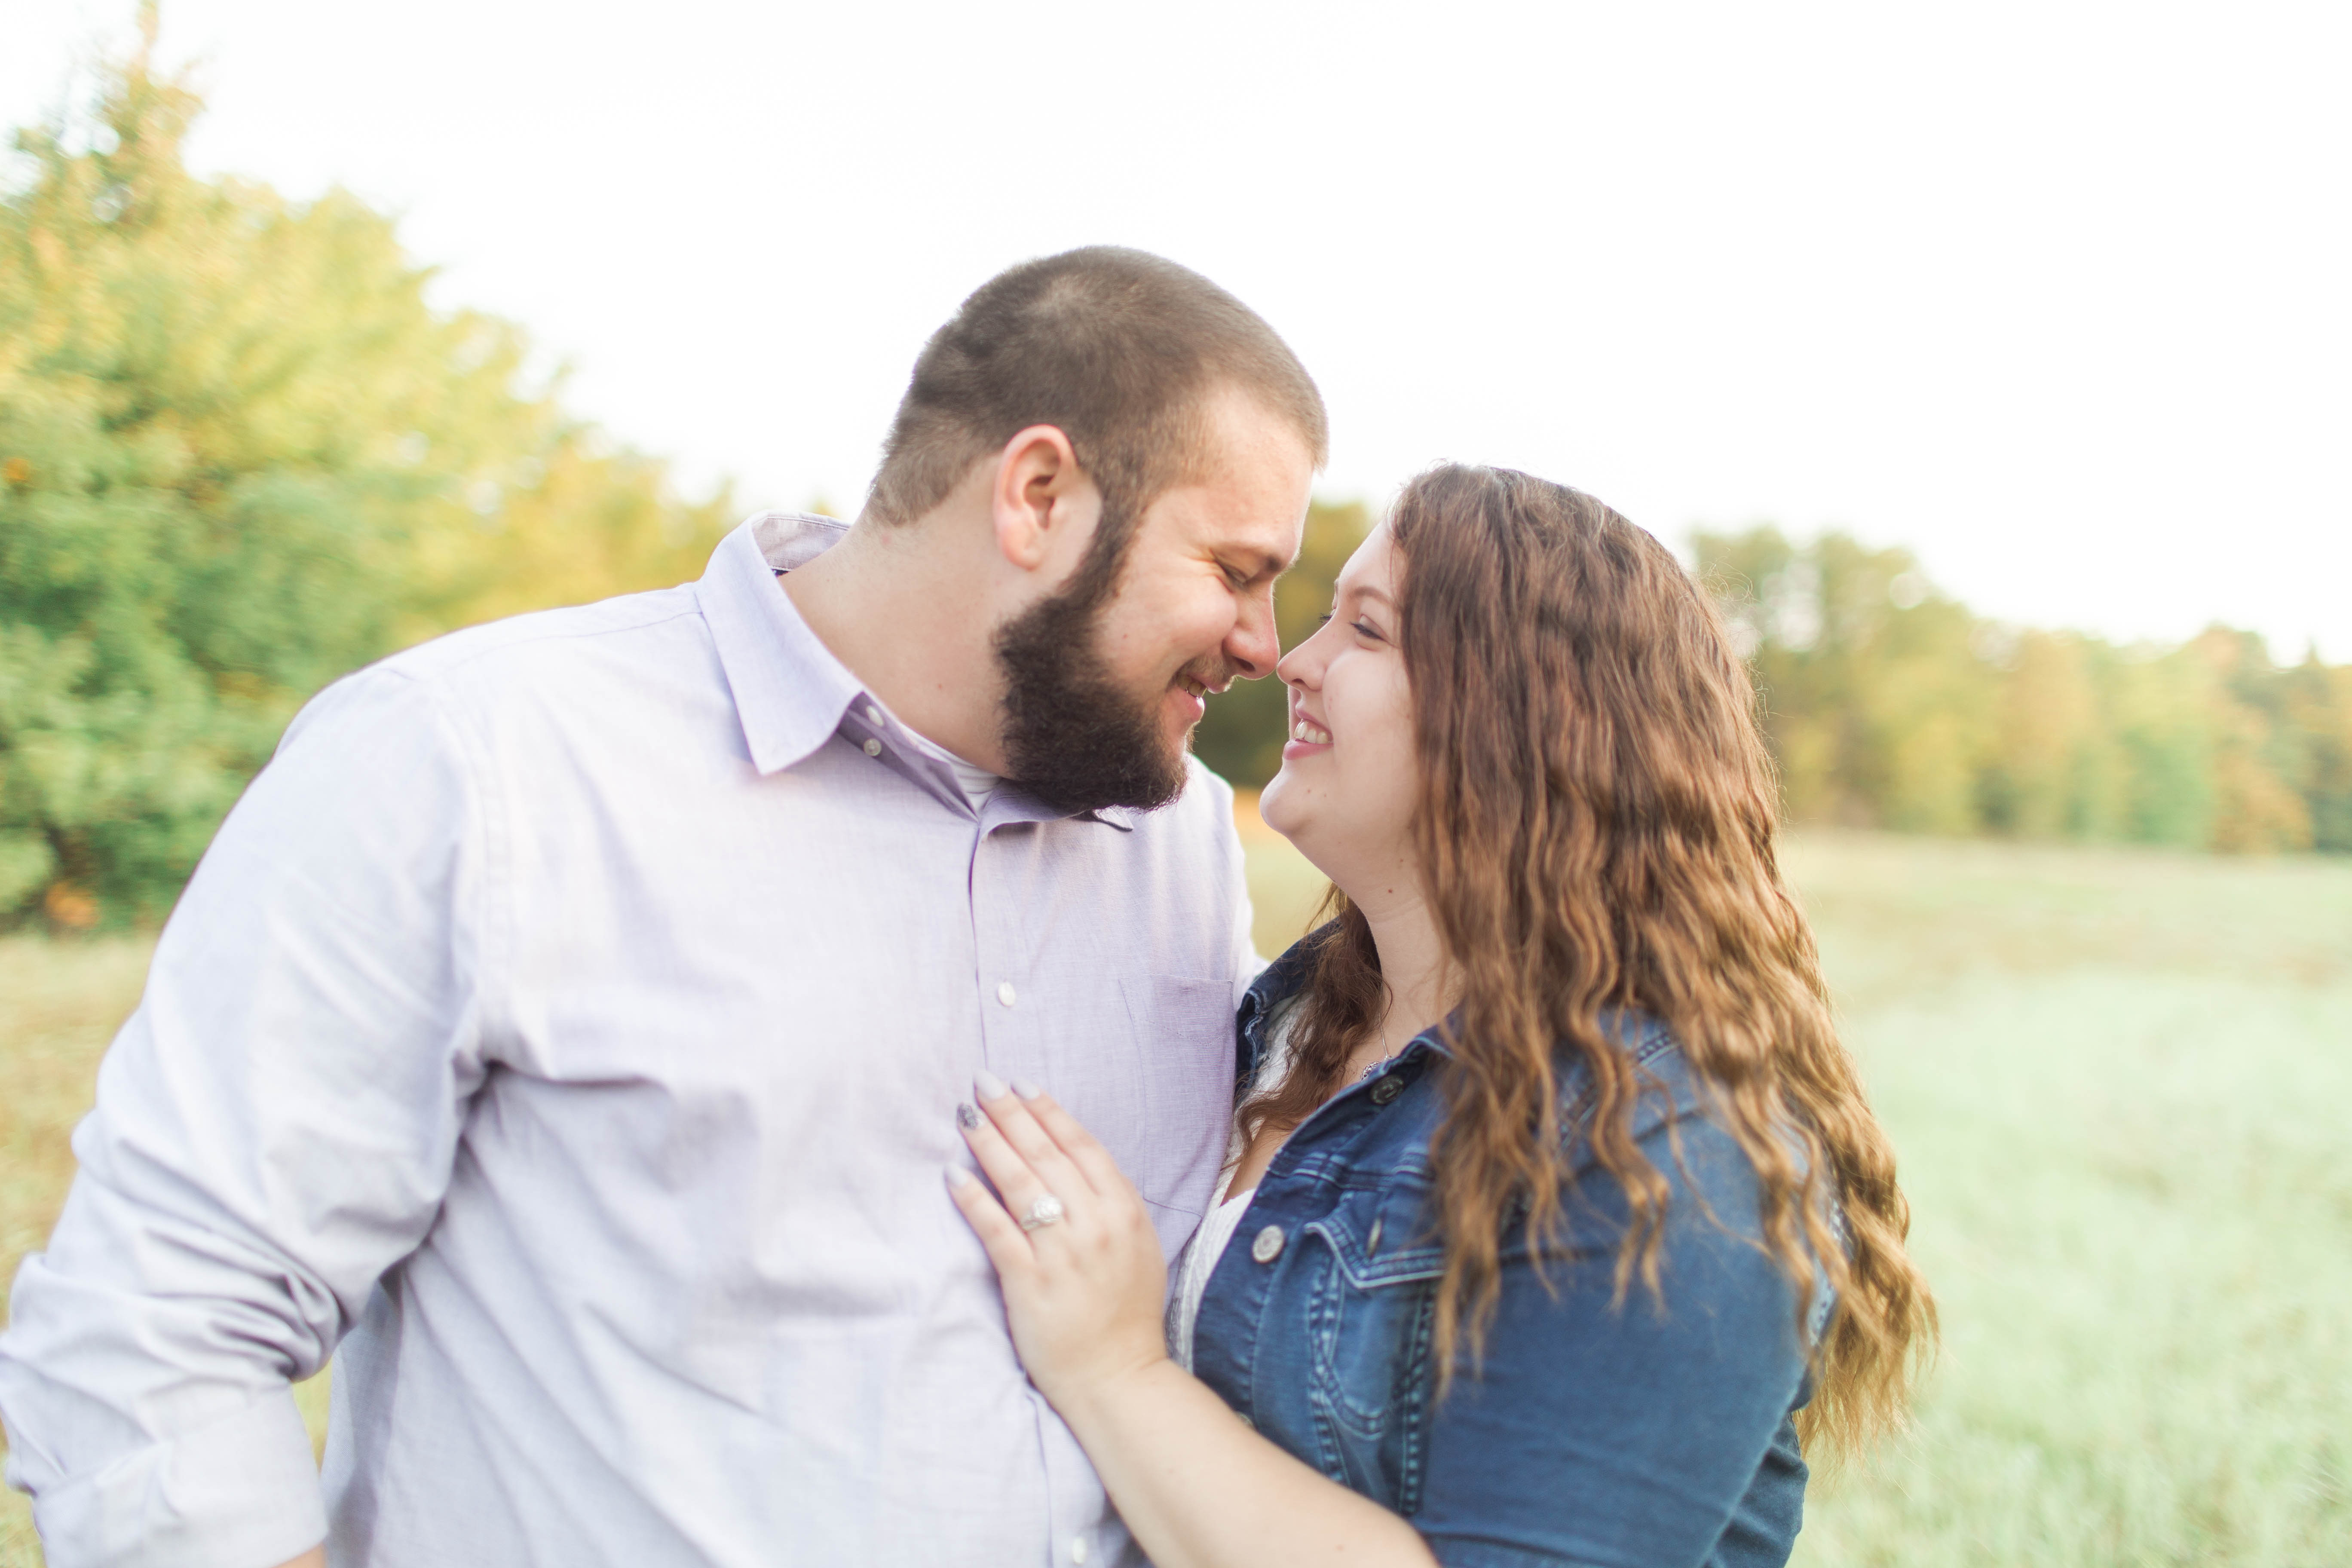 Engagement Session - Arbor Hills Nature Preserve | Becca Sue Photography - beccasuephotography.comEngagement Session - Arbor Hills Nature Preserve | Becca Sue Photography - beccasuephotography.comEngagement Session - Arbor Hills Nature Preserve | Becca Sue Photography - beccasuephotography.com